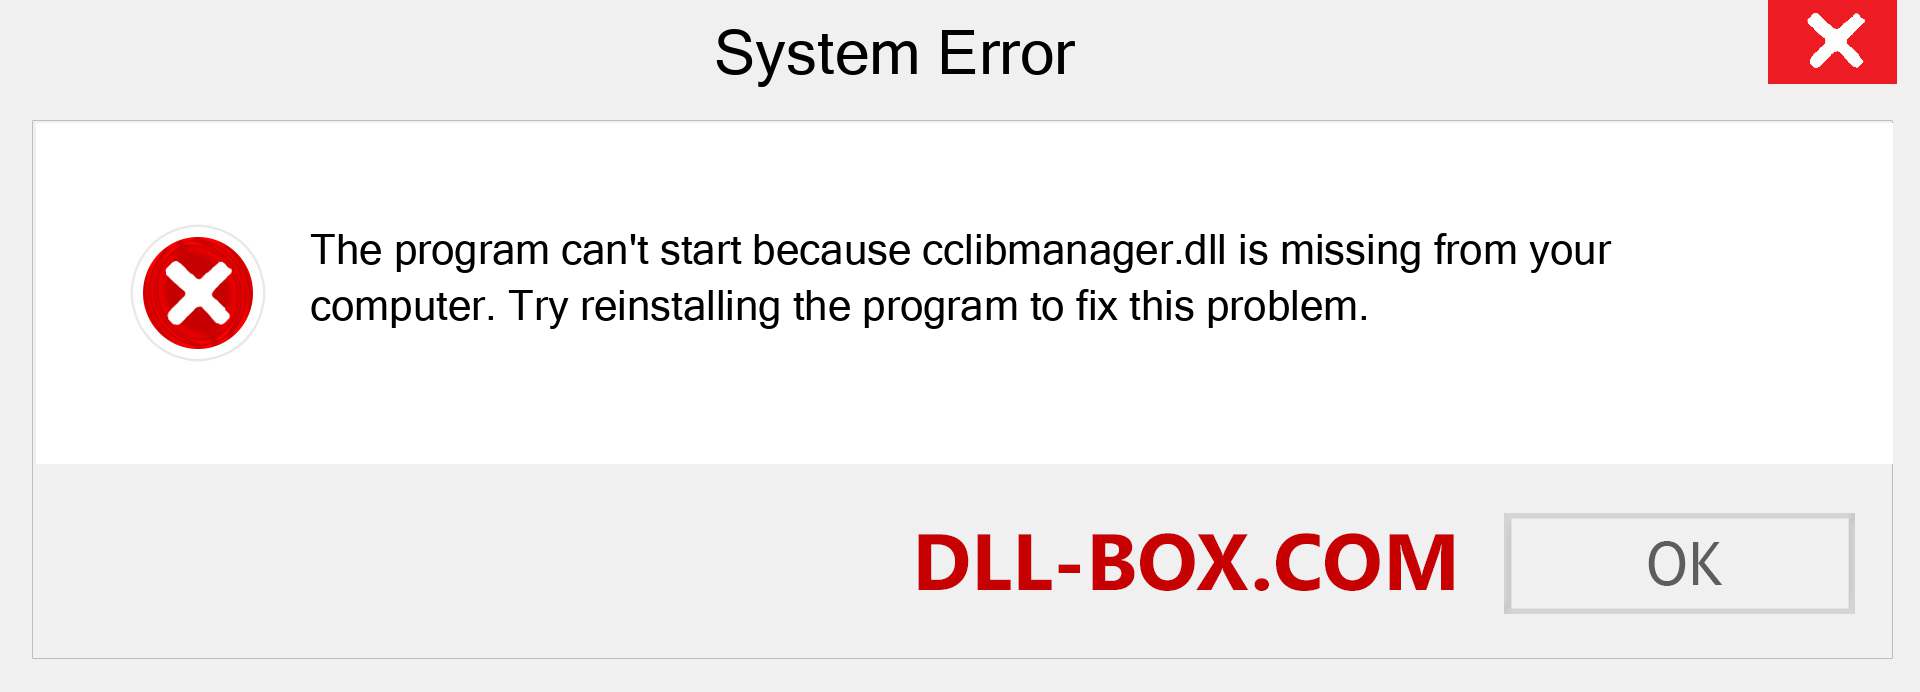  cclibmanager.dll file is missing?. Download for Windows 7, 8, 10 - Fix  cclibmanager dll Missing Error on Windows, photos, images